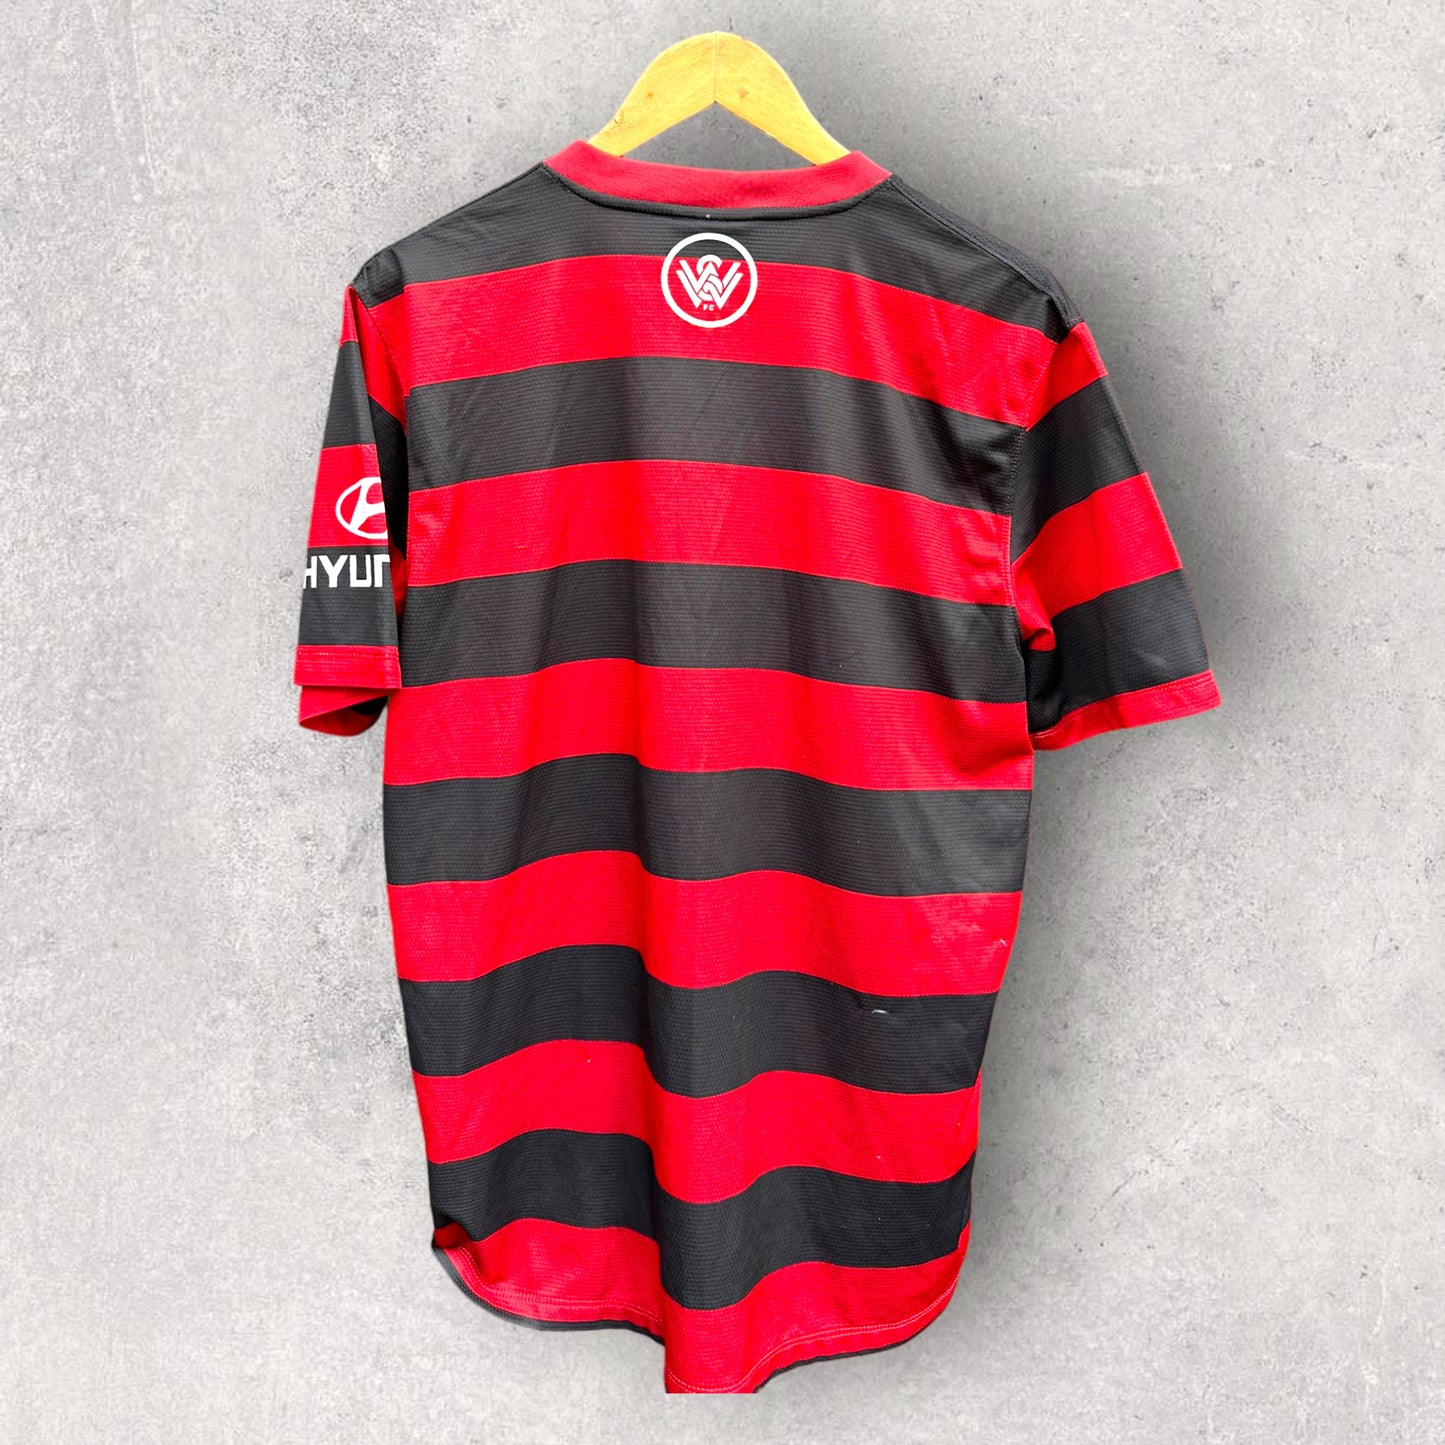 WSW 2013-2014 HOME JERSEY